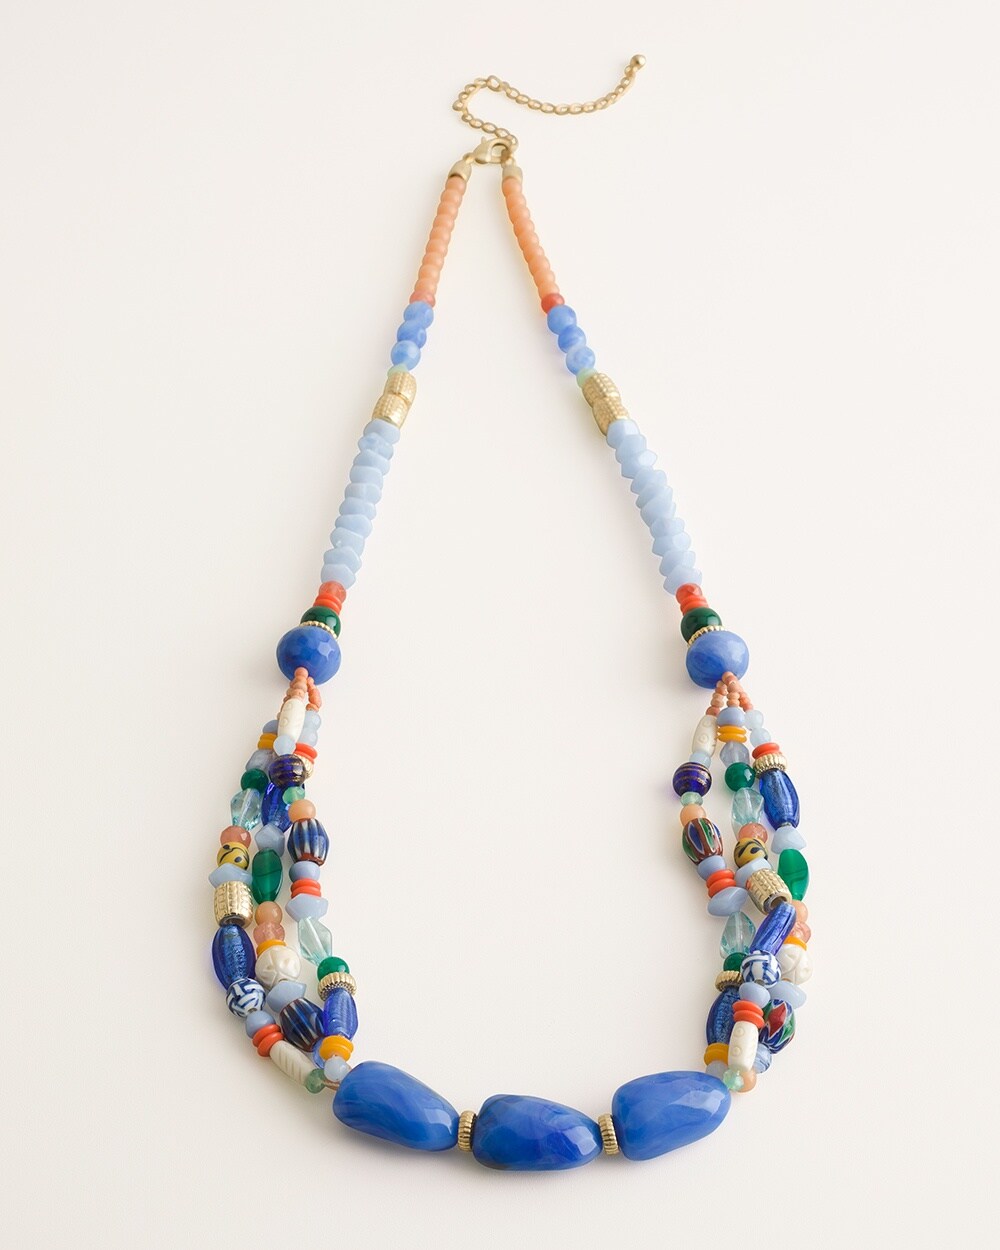 Long Beaded Multi-Colored Multi-Strand Necklace